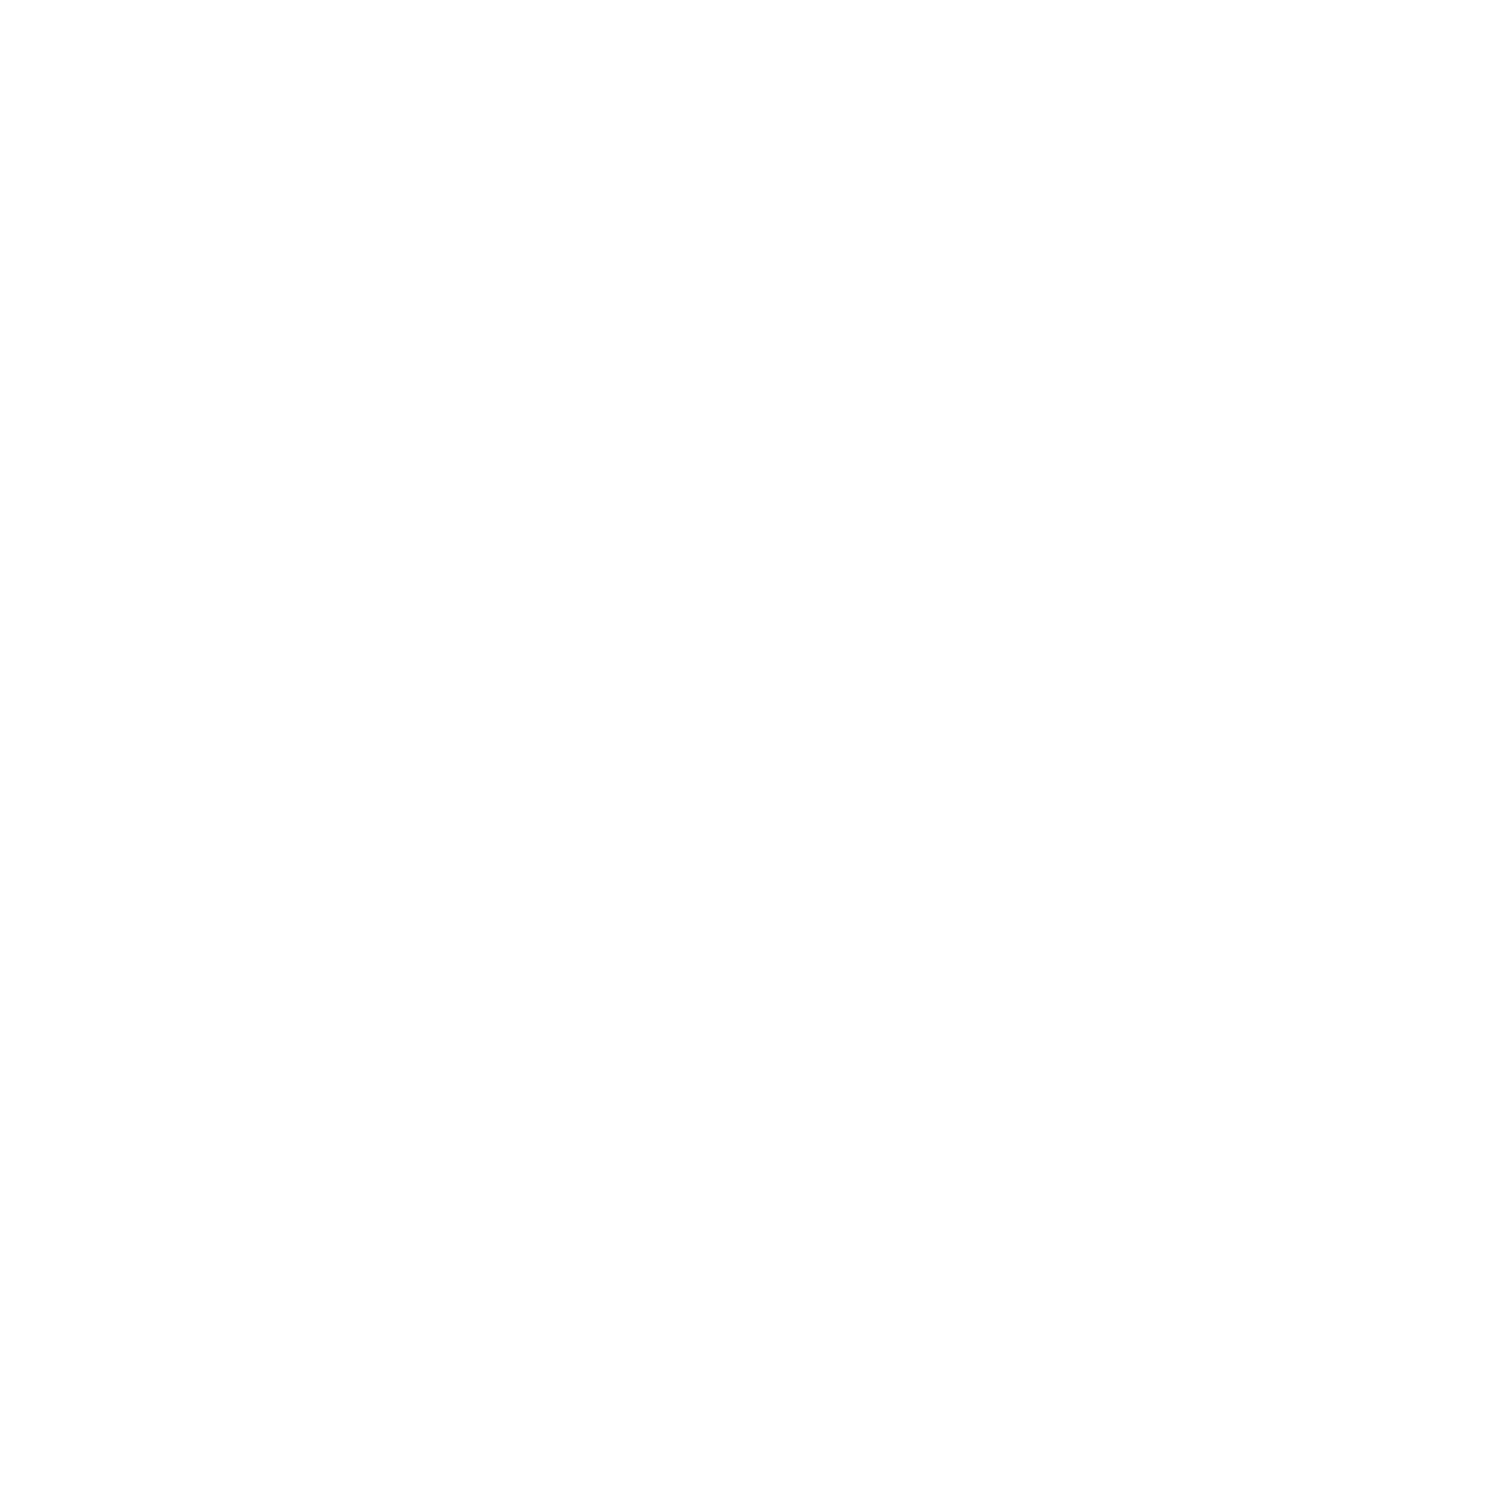 Aylwin barbecue